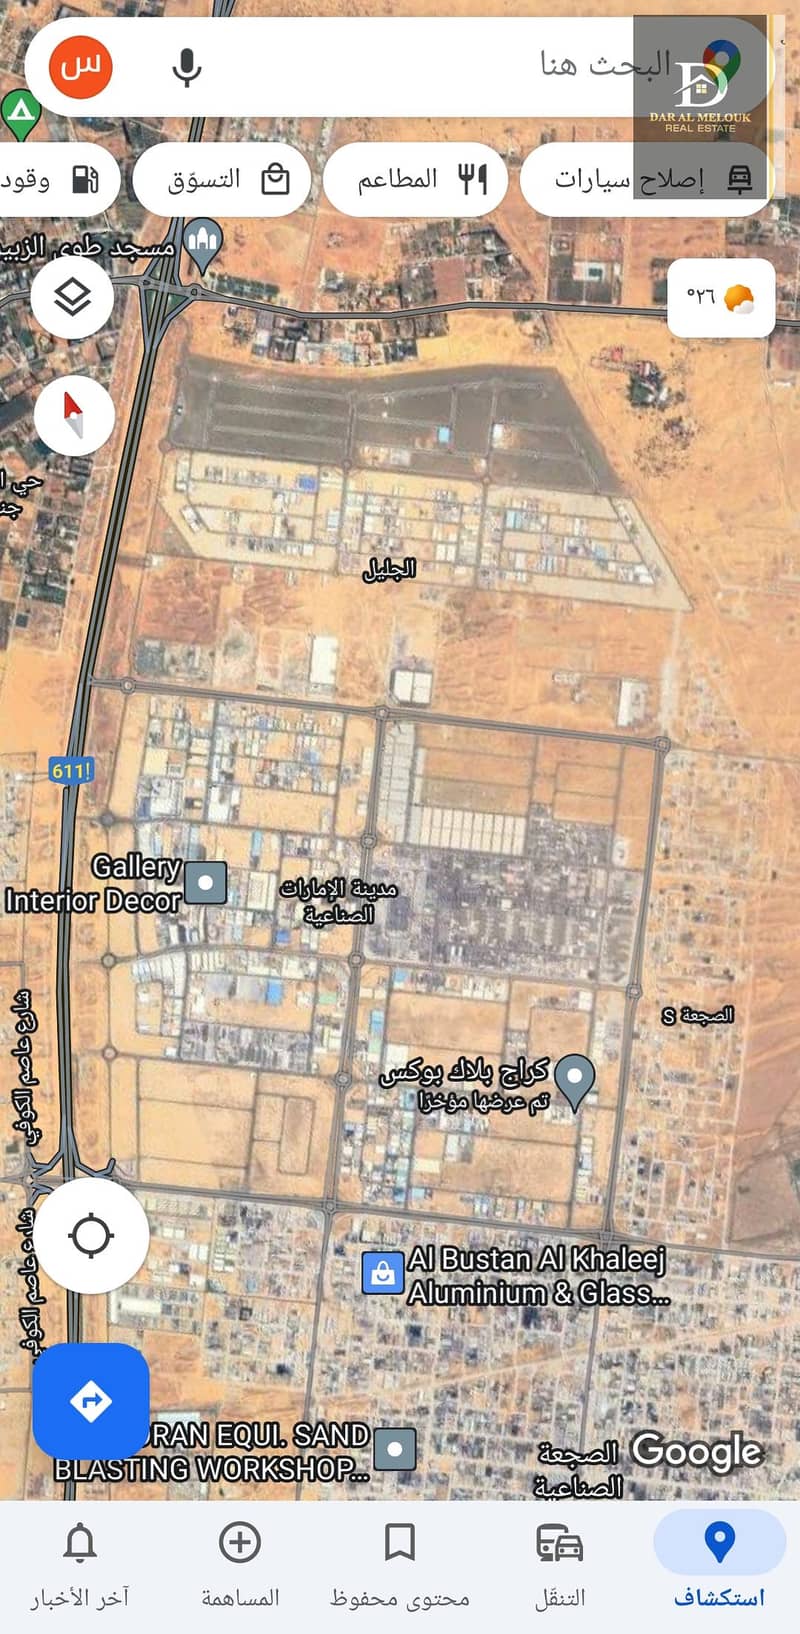 For sale in Sharjah, Al-Saja’a Industrial Area, industrial land, area of ​​20,000 thousand feet, industrial permit, Hota and Shabrat, excellent location, freehold, all Arab nationalities. The Al-Saja’a area is characterized by easy entry and exit, close t